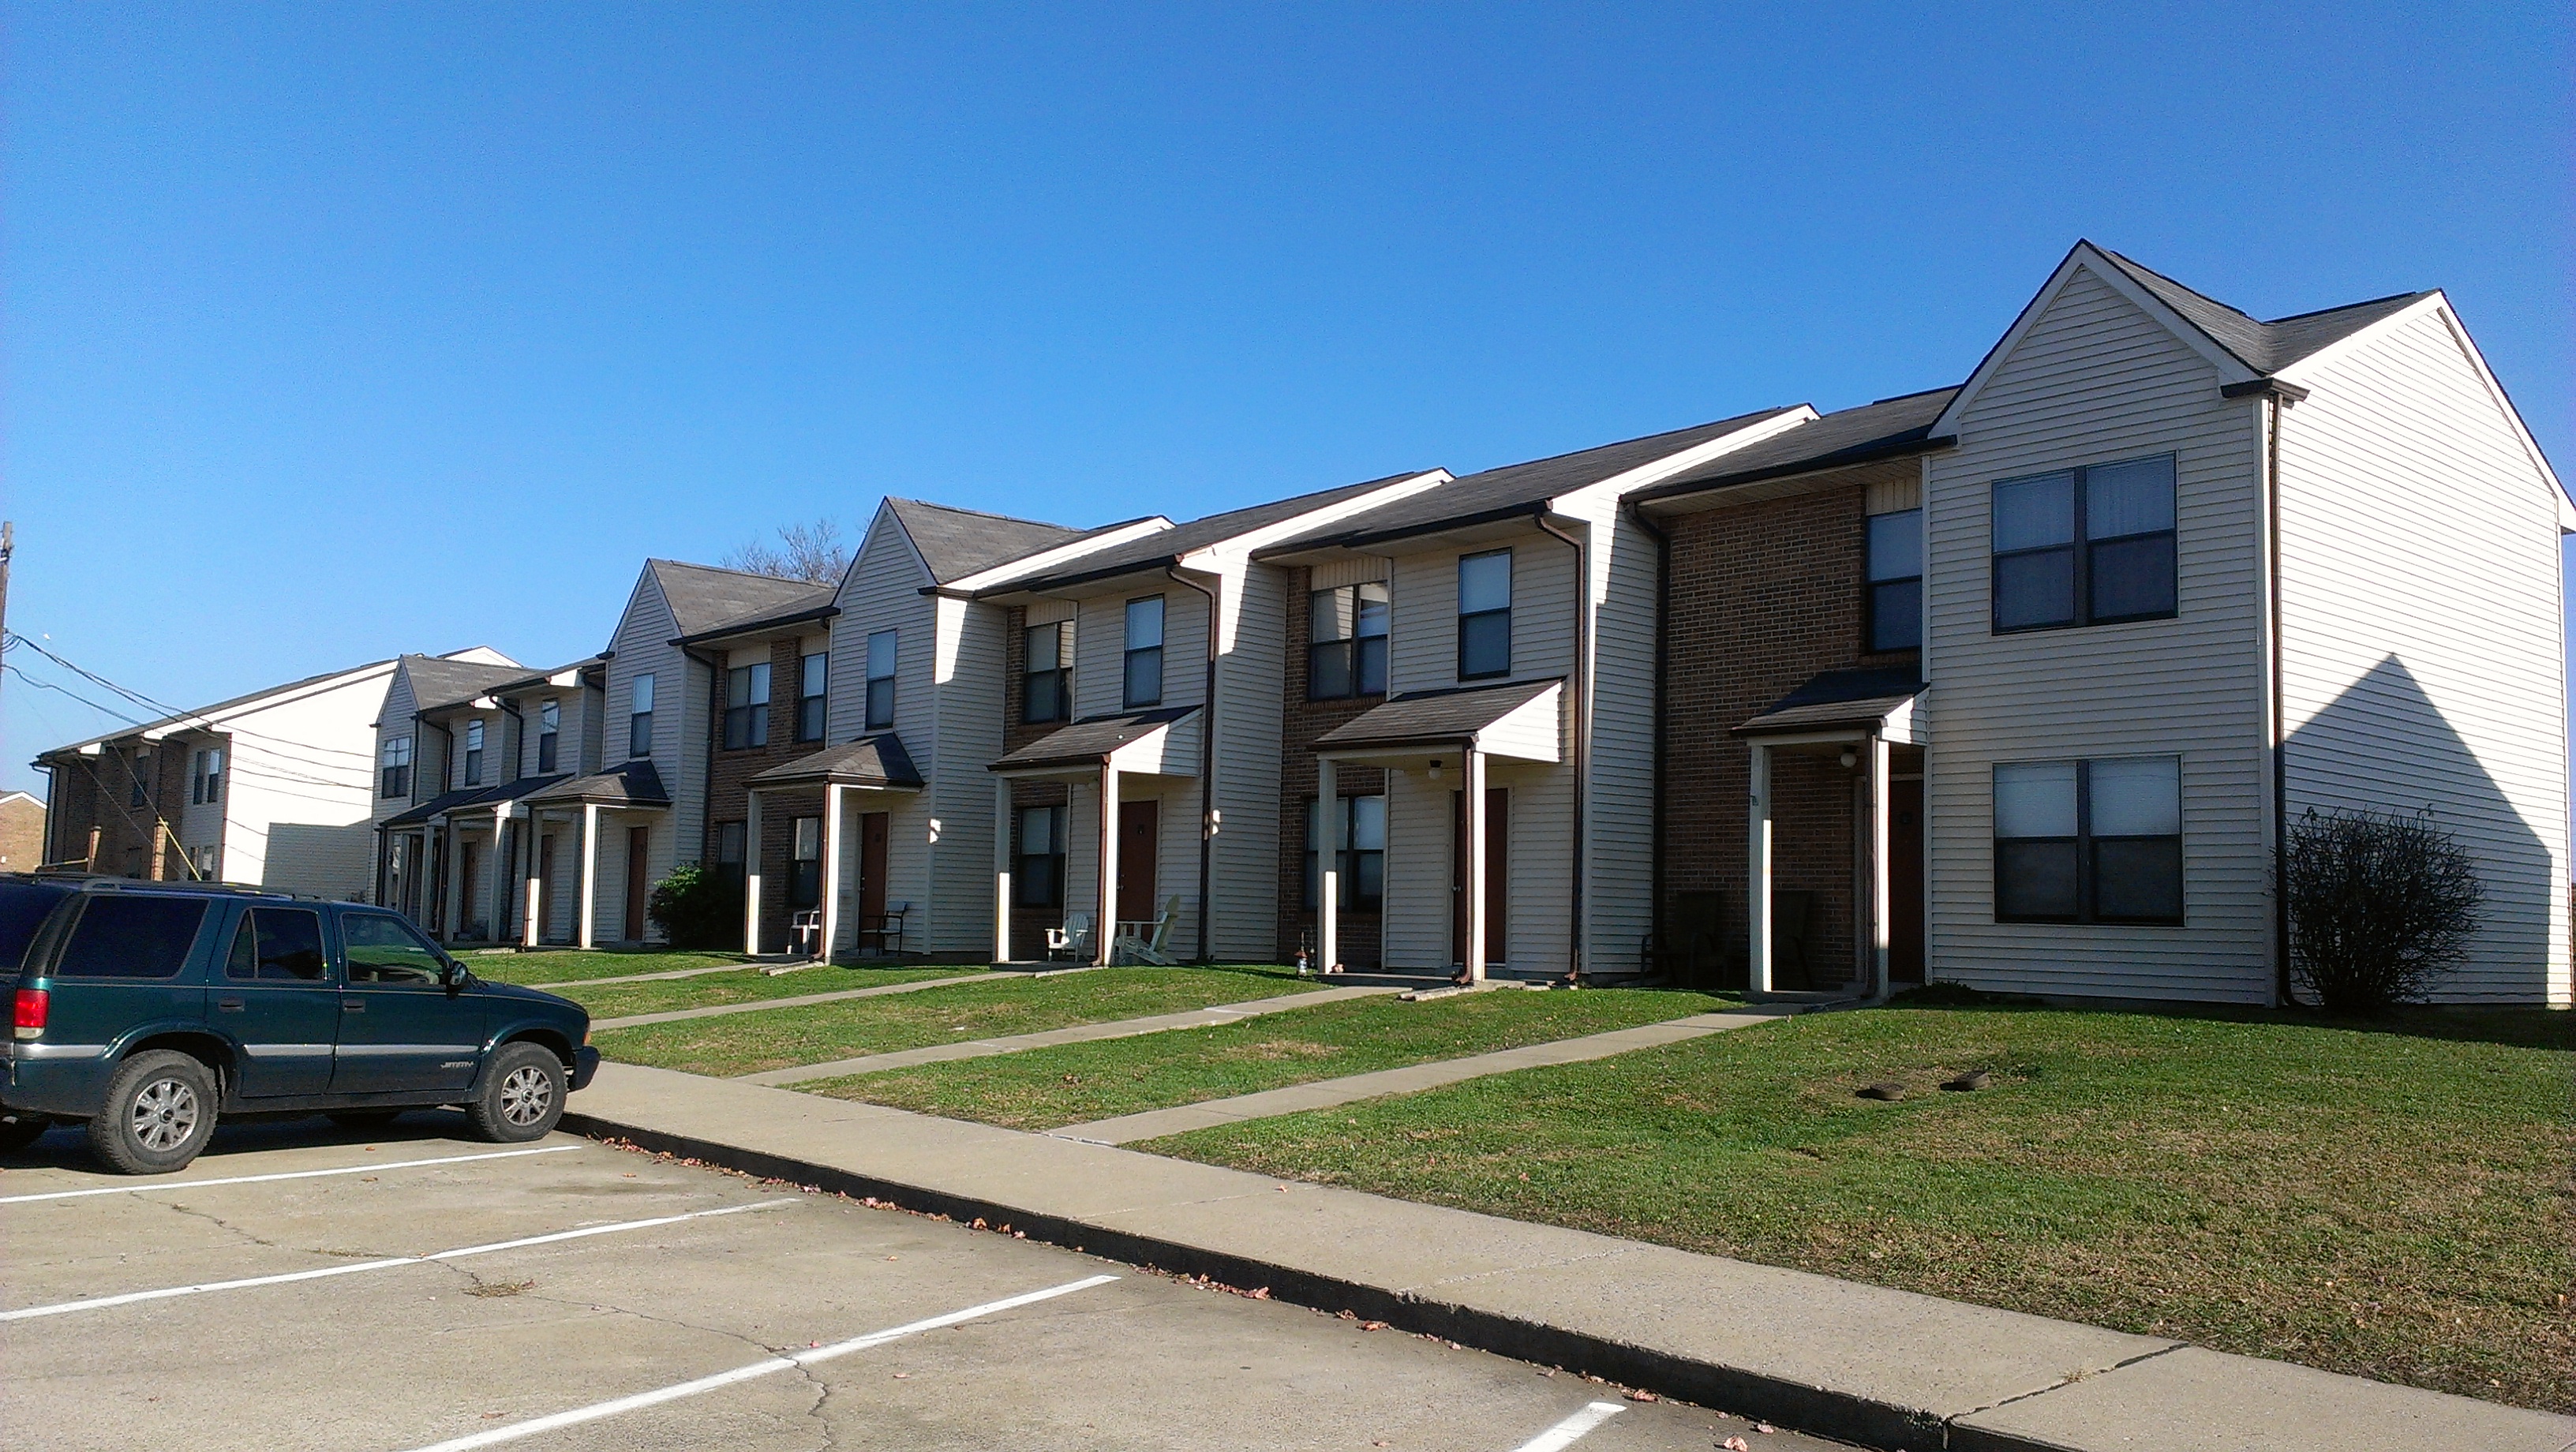 FLEMING TRACE APARTMENTS